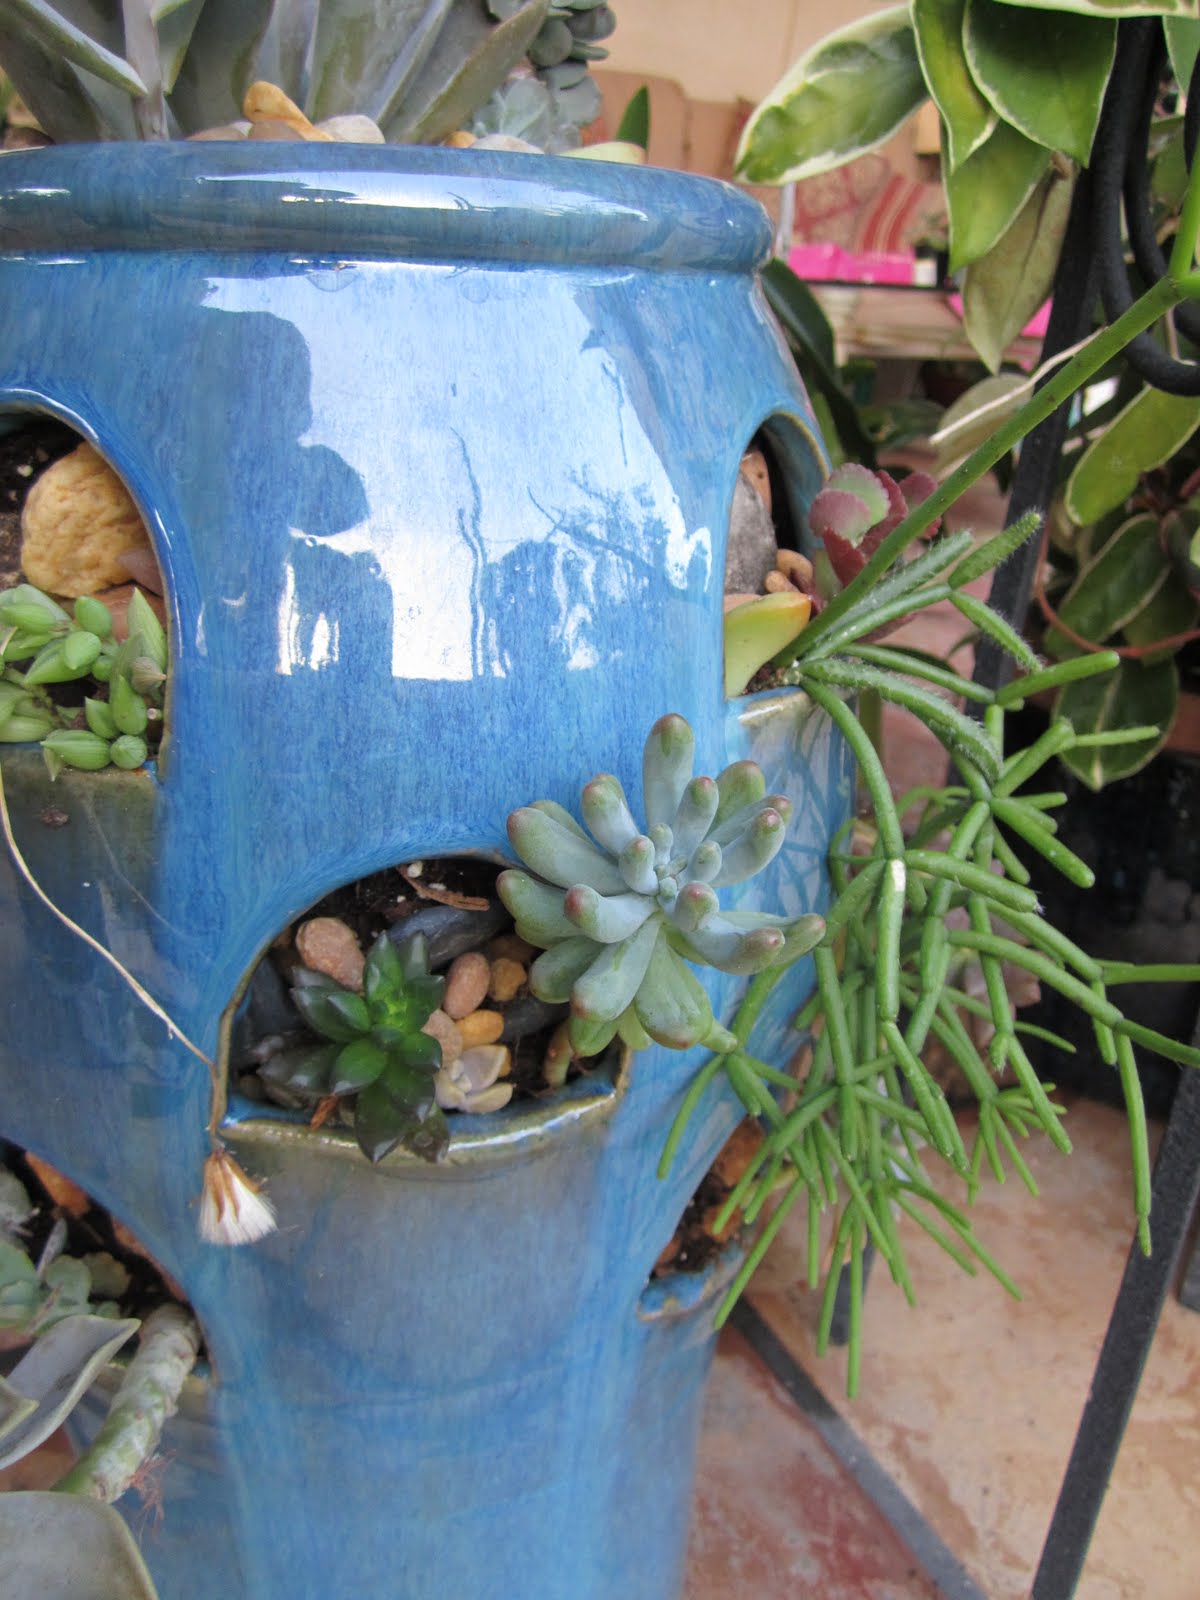 Houzz Article Archives Page 2 Of 2 Ramblings From A Desert Garden